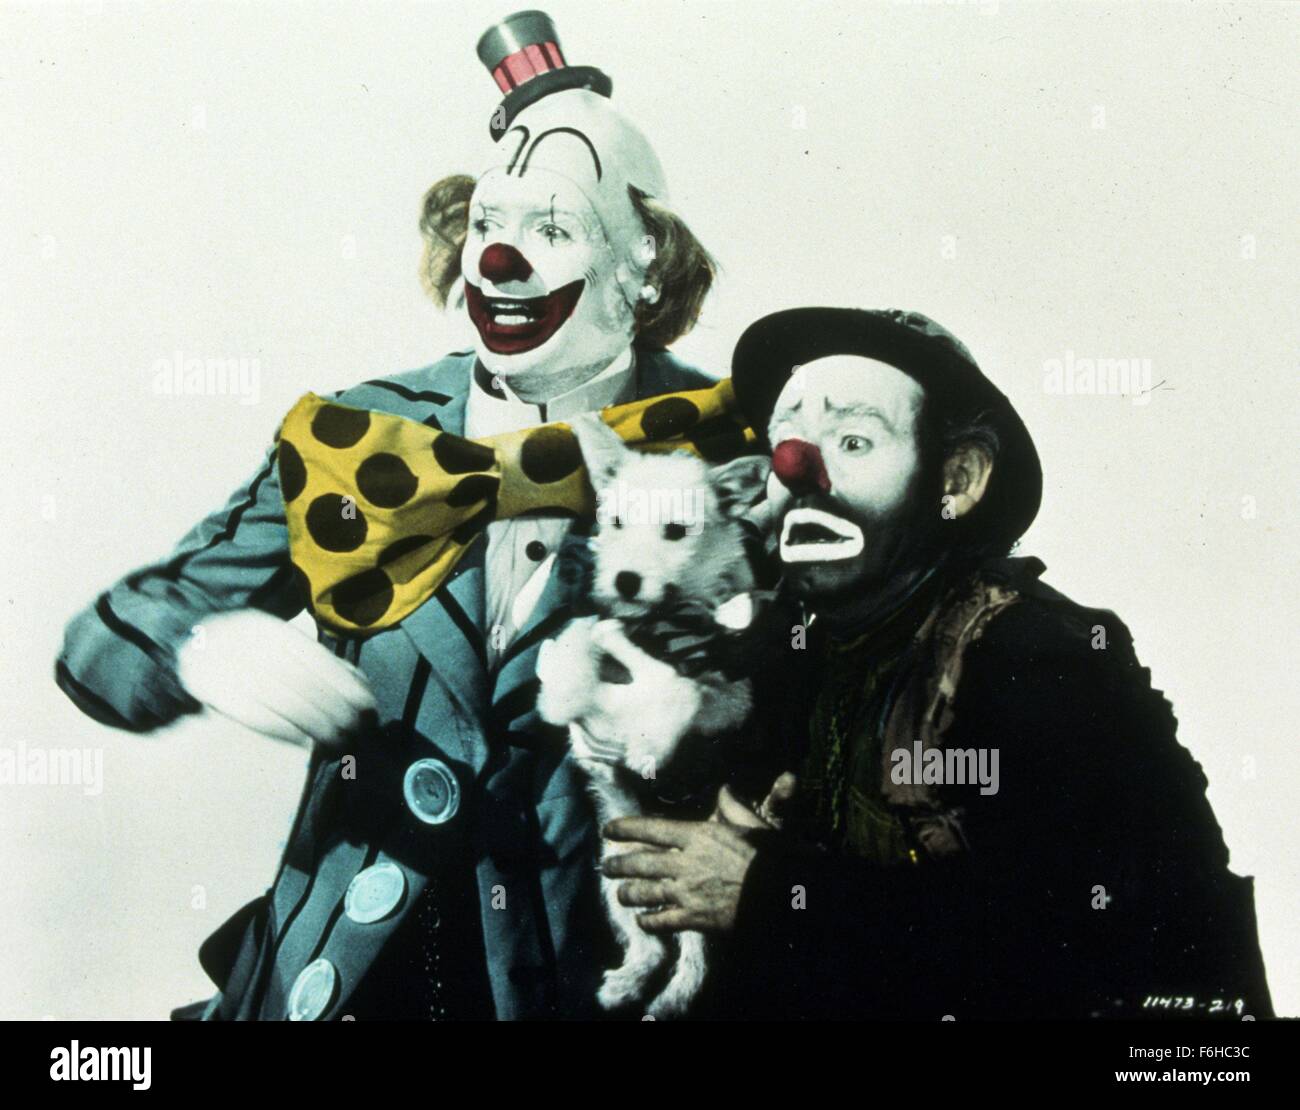 1952, Film Title: GREATEST SHOW ON EARTH, Director: CECIL B DeMILLE, Studio: PARAMOUNT, Pictured: CLOTHING, CLOWN, CLOWN MAKEUP, CECIL B DeMILLE, DOG, EMMETT KELLY. (Credit Image: SNAP) Stock Photo